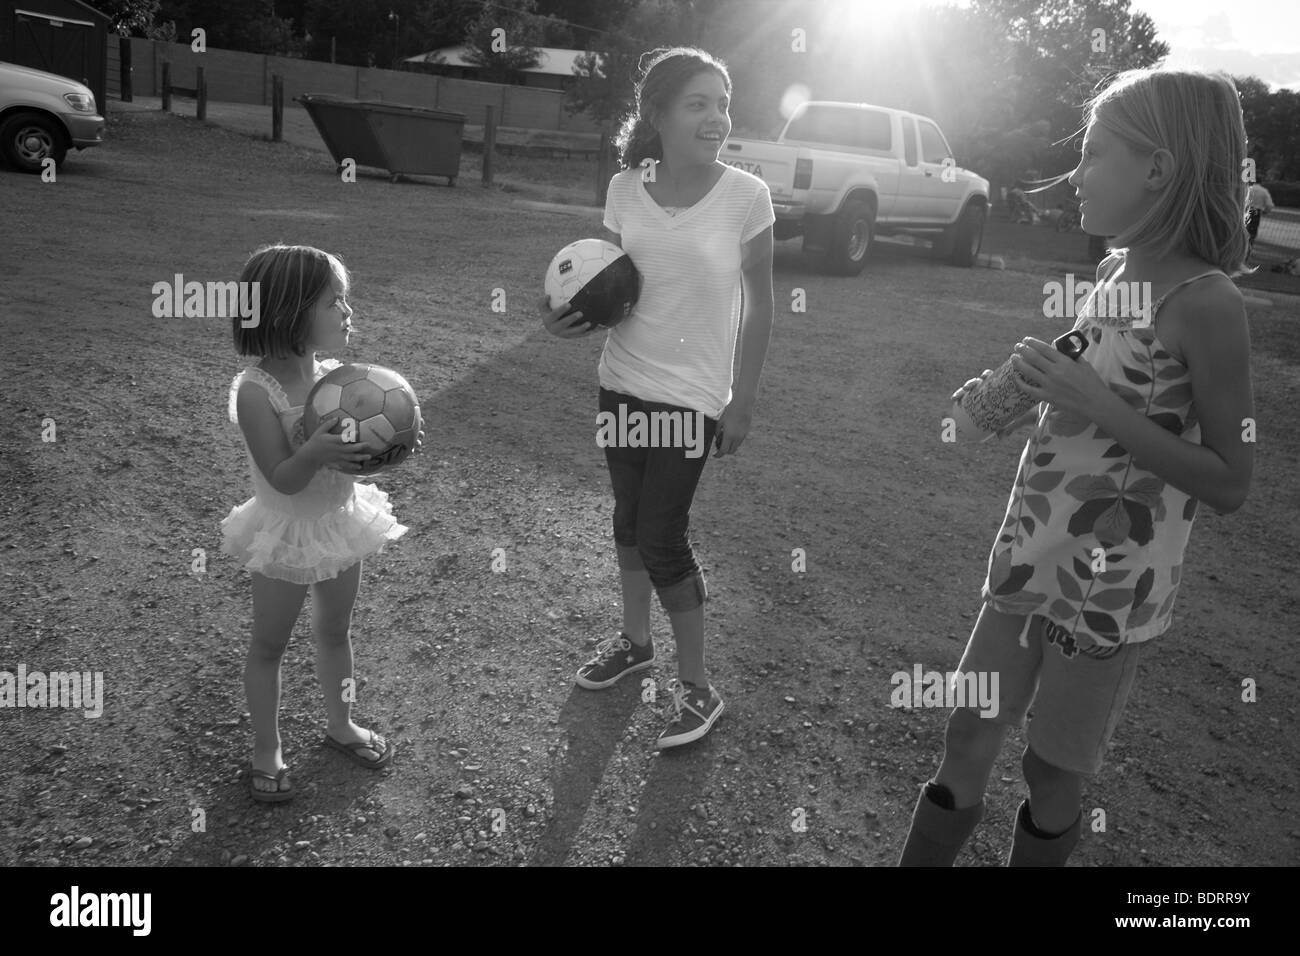 Black and white image of three girls holding soccer ball Stock Photo